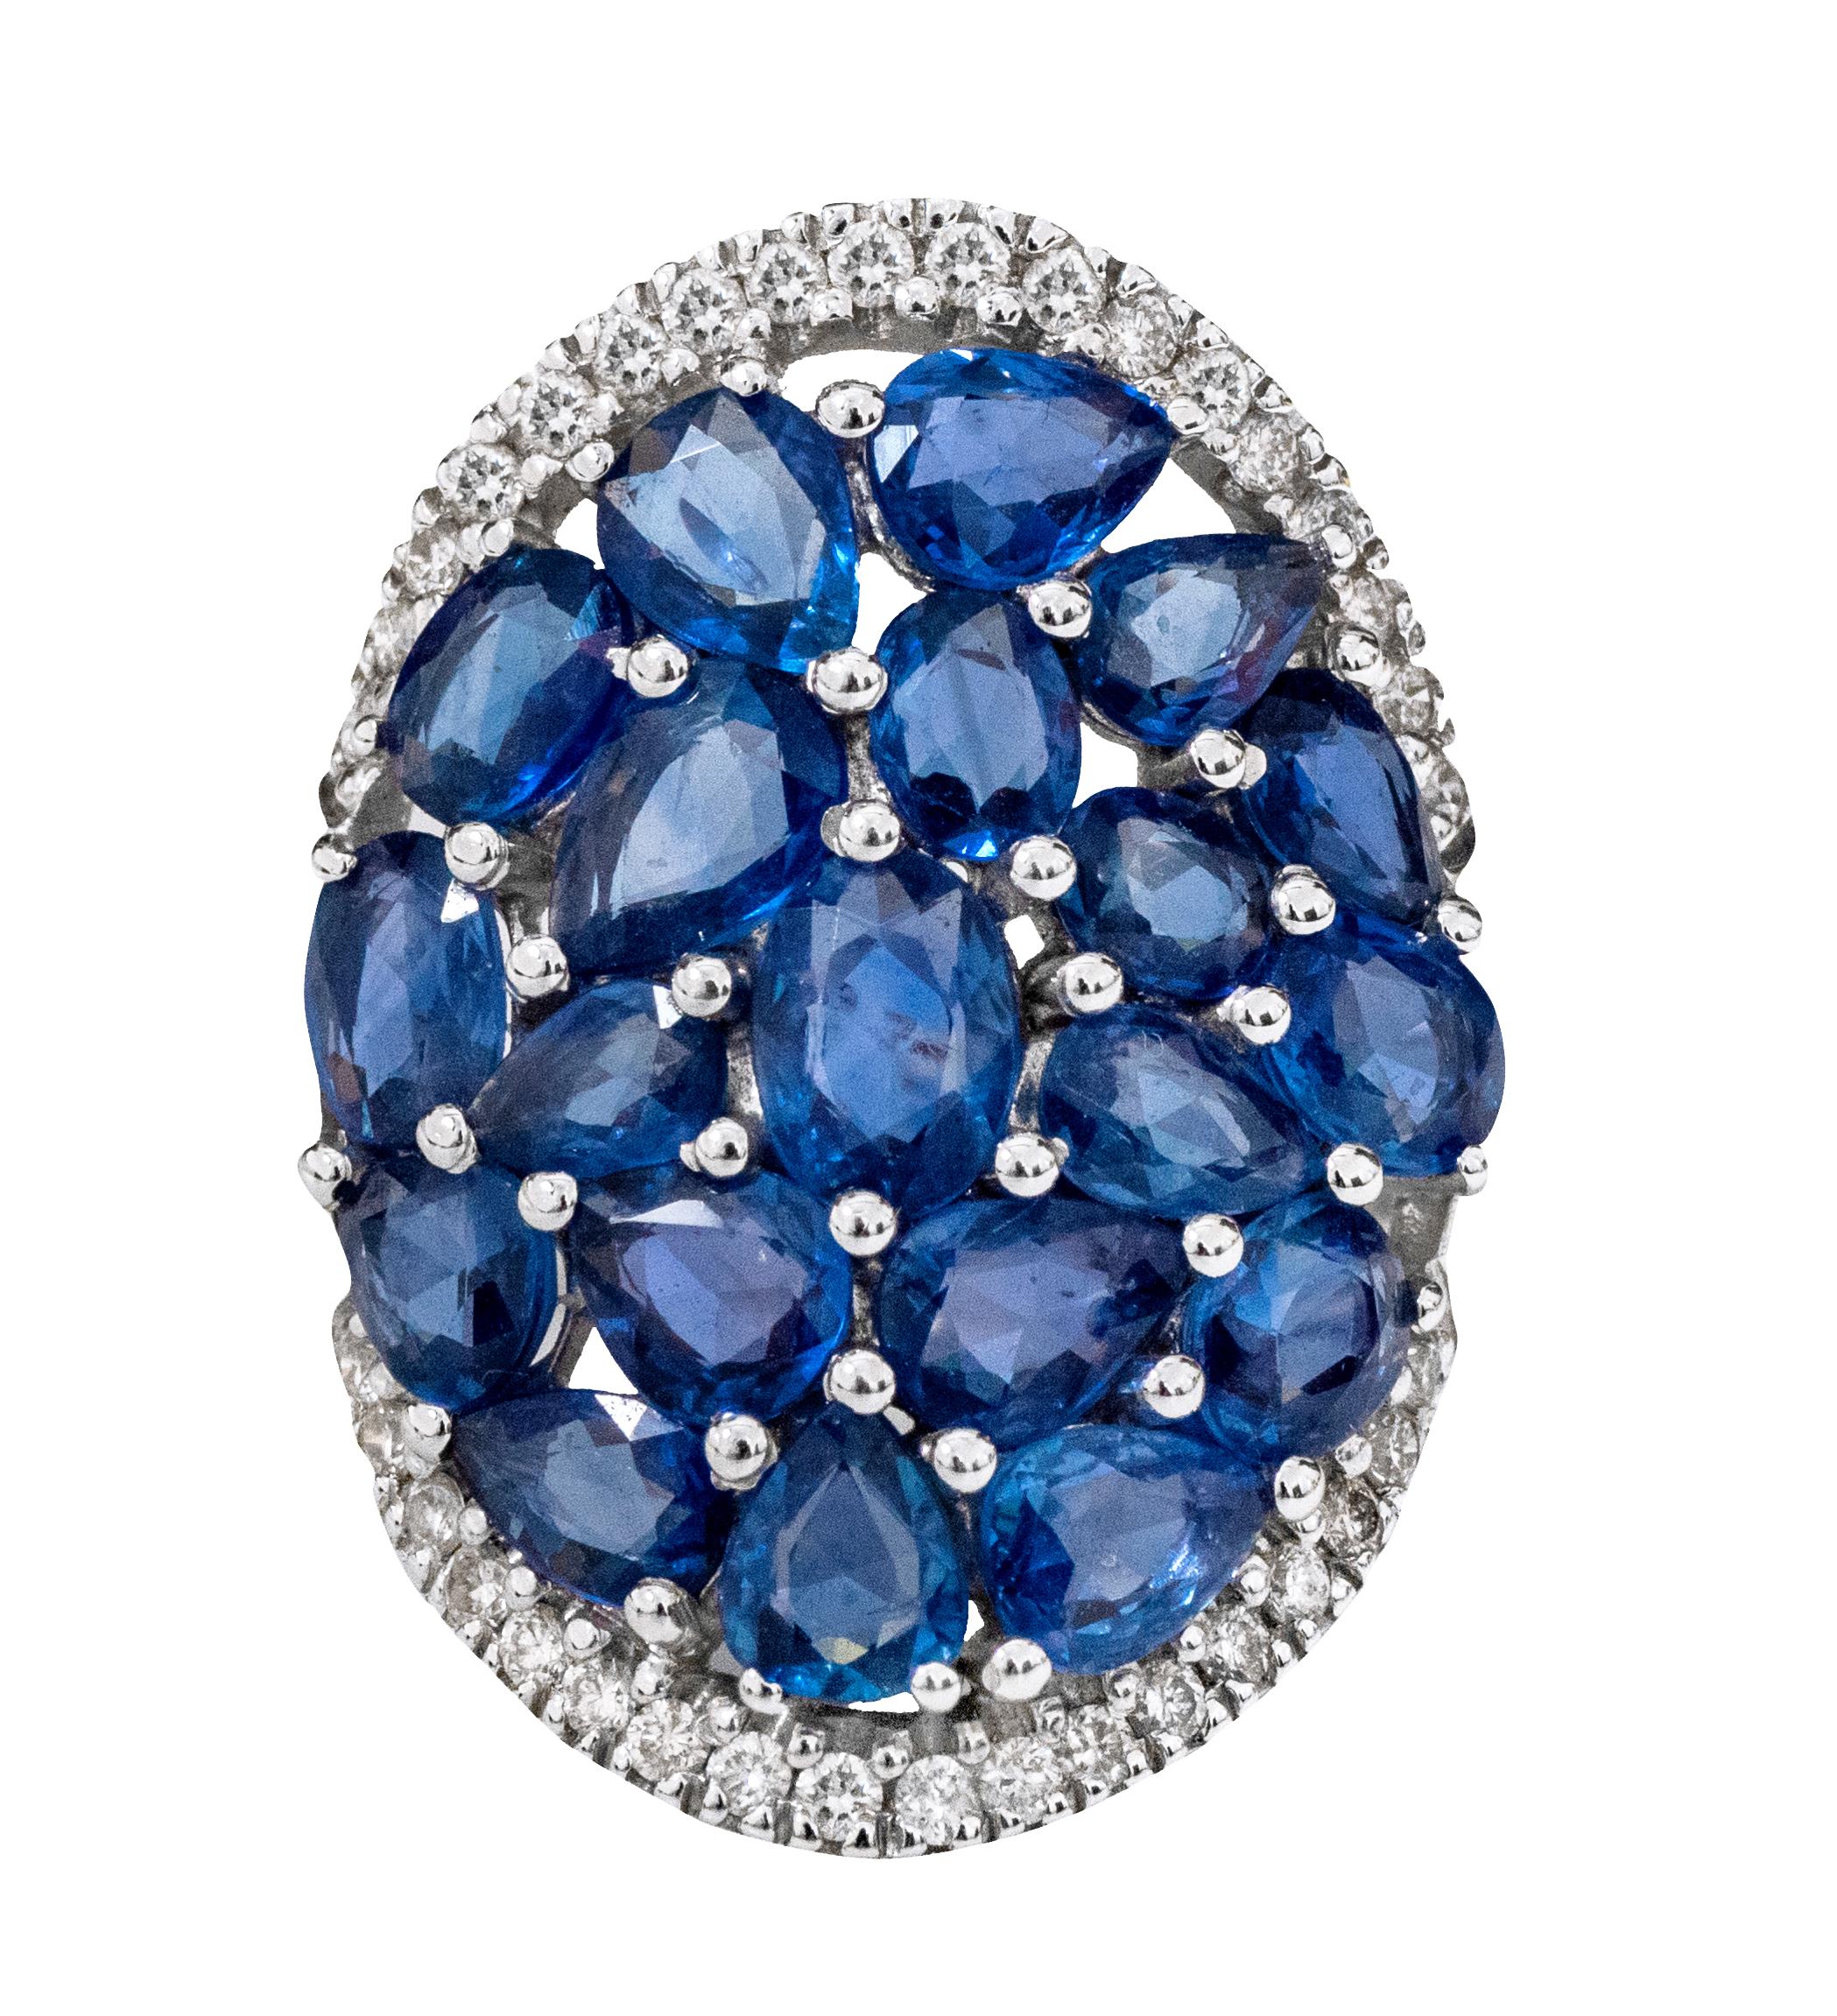 18 Karat White Gold 5.81 Carat Sapphire and Diamond Ring

This magnificent azure blue sapphire and diamond round long cocktail ring is mesmerizing. The mix shape and size of oval and pear-shaped solitaire blue sapphires form the center of the broad